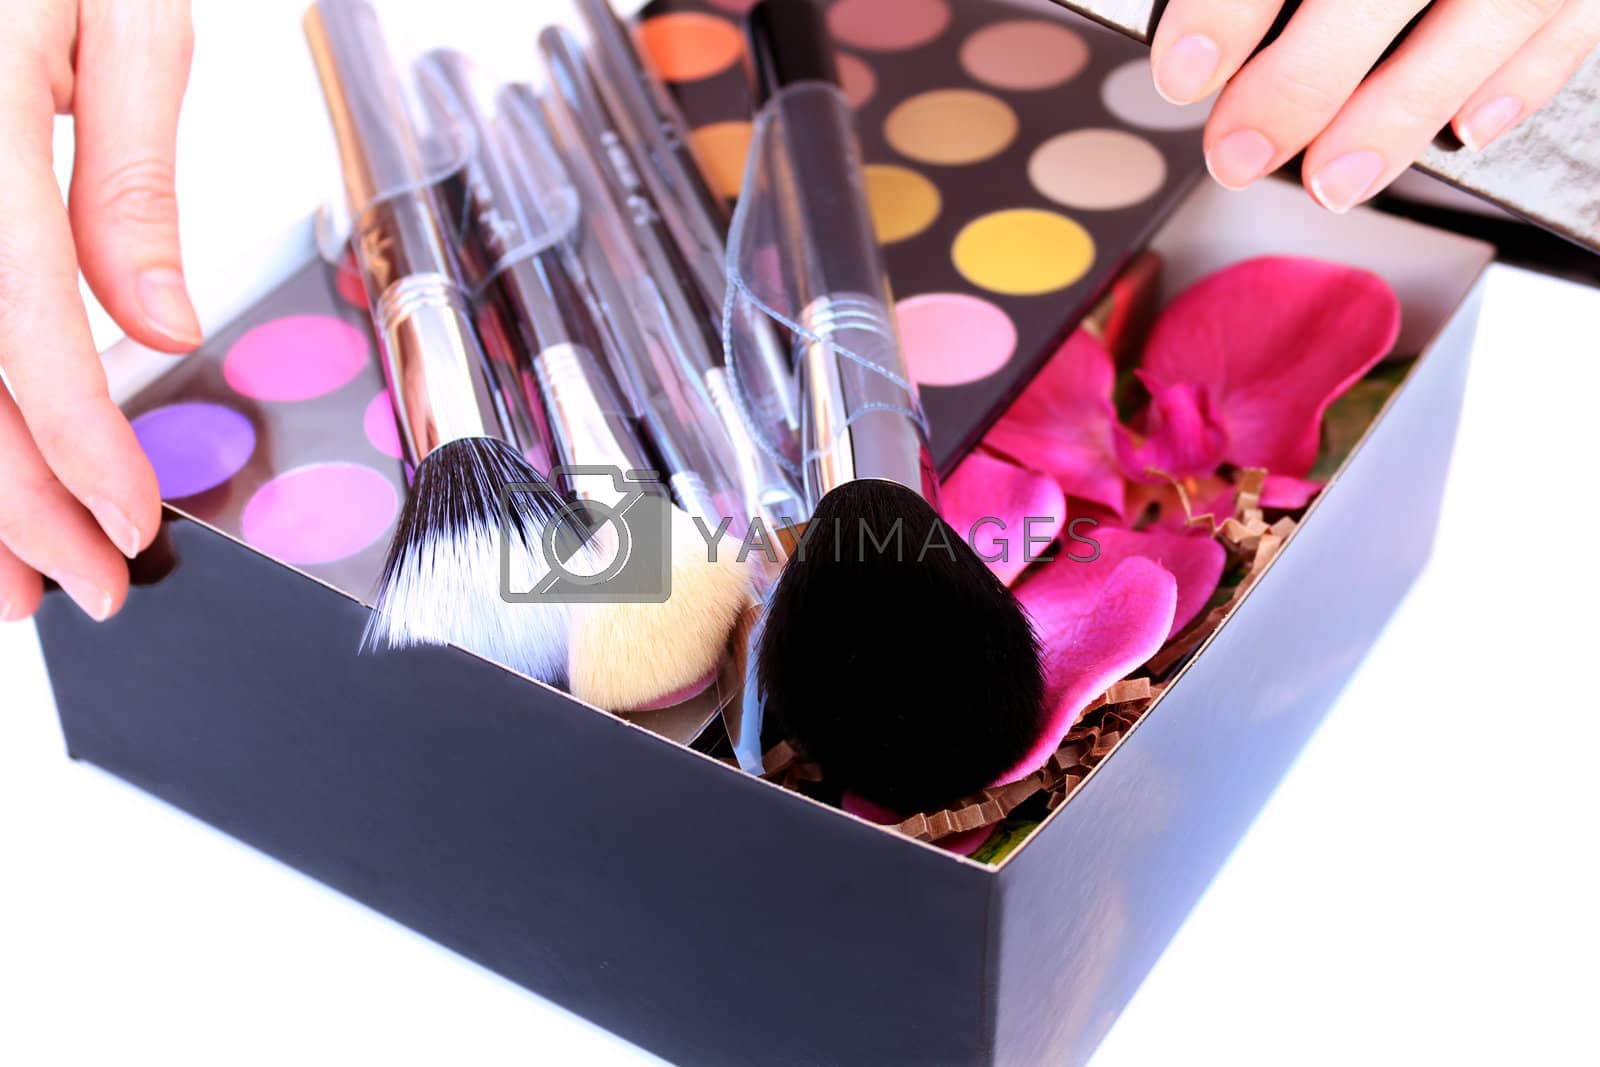 Royalty free image of Gift Box with makeup inside  by javiercorrea15